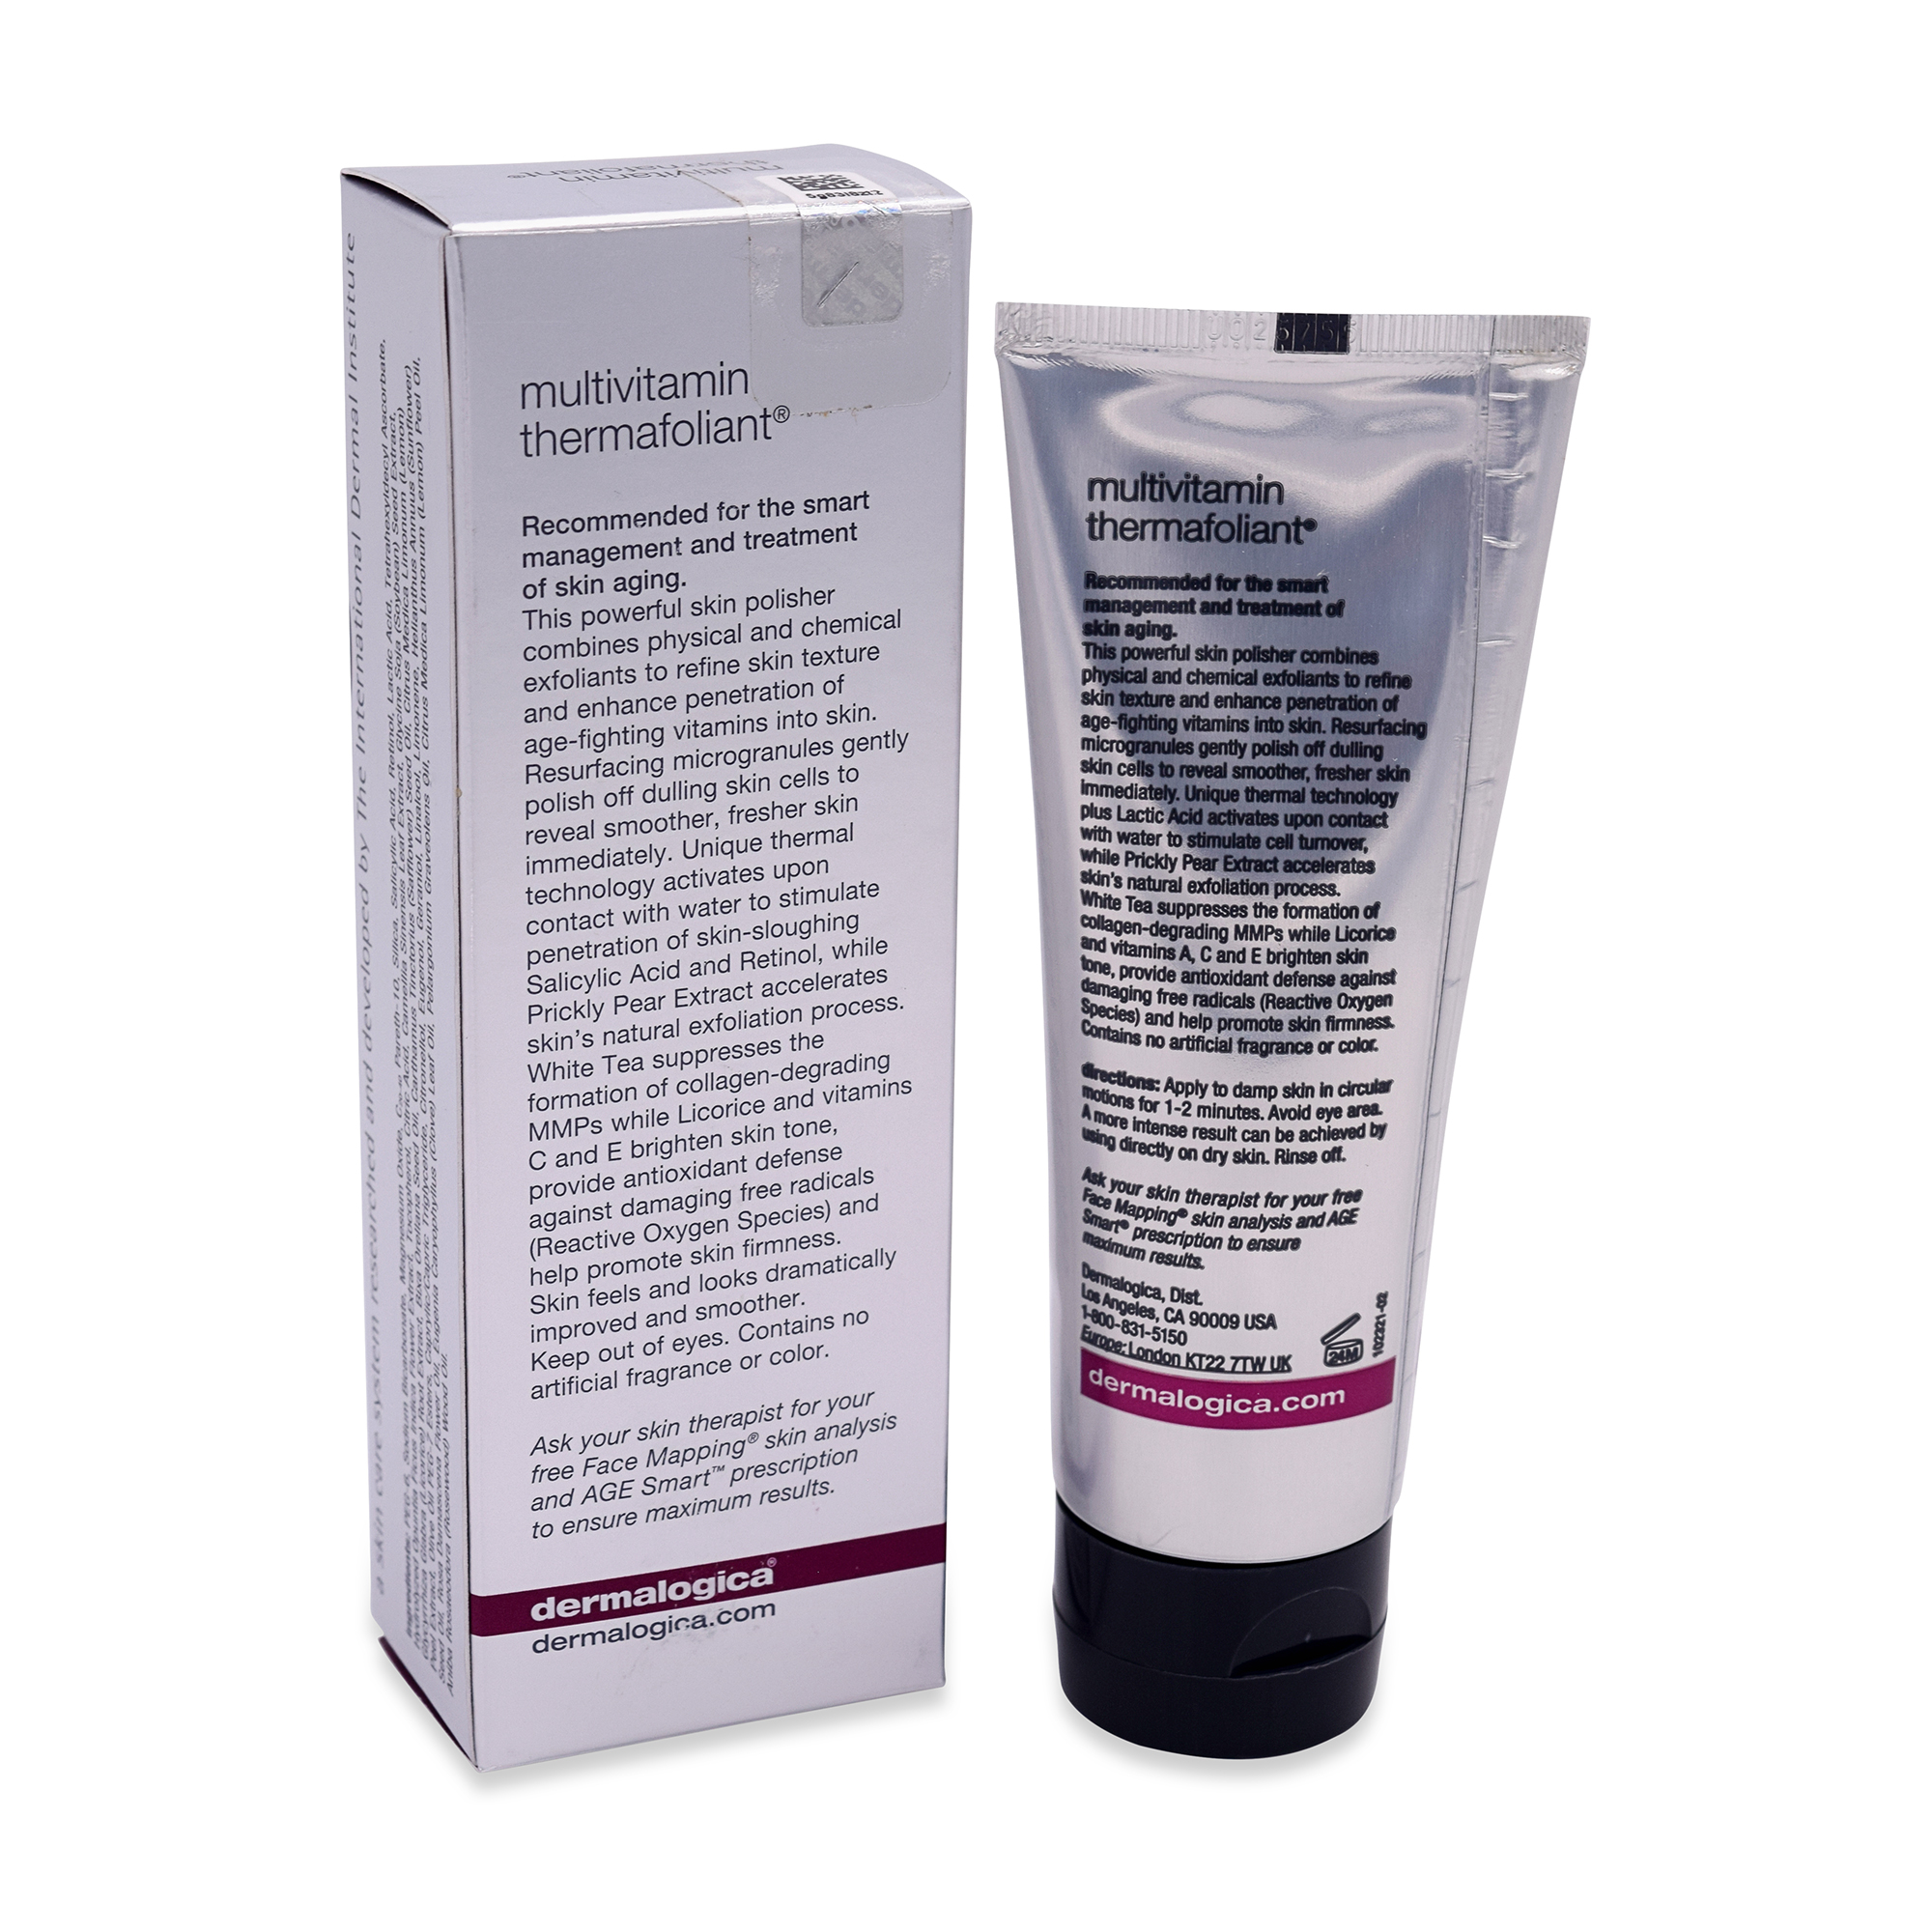 Age Smart Multivitamin Thermafoliant by Dermalogica for Unisex - 2.5 oz Scrub - image 4 of 5